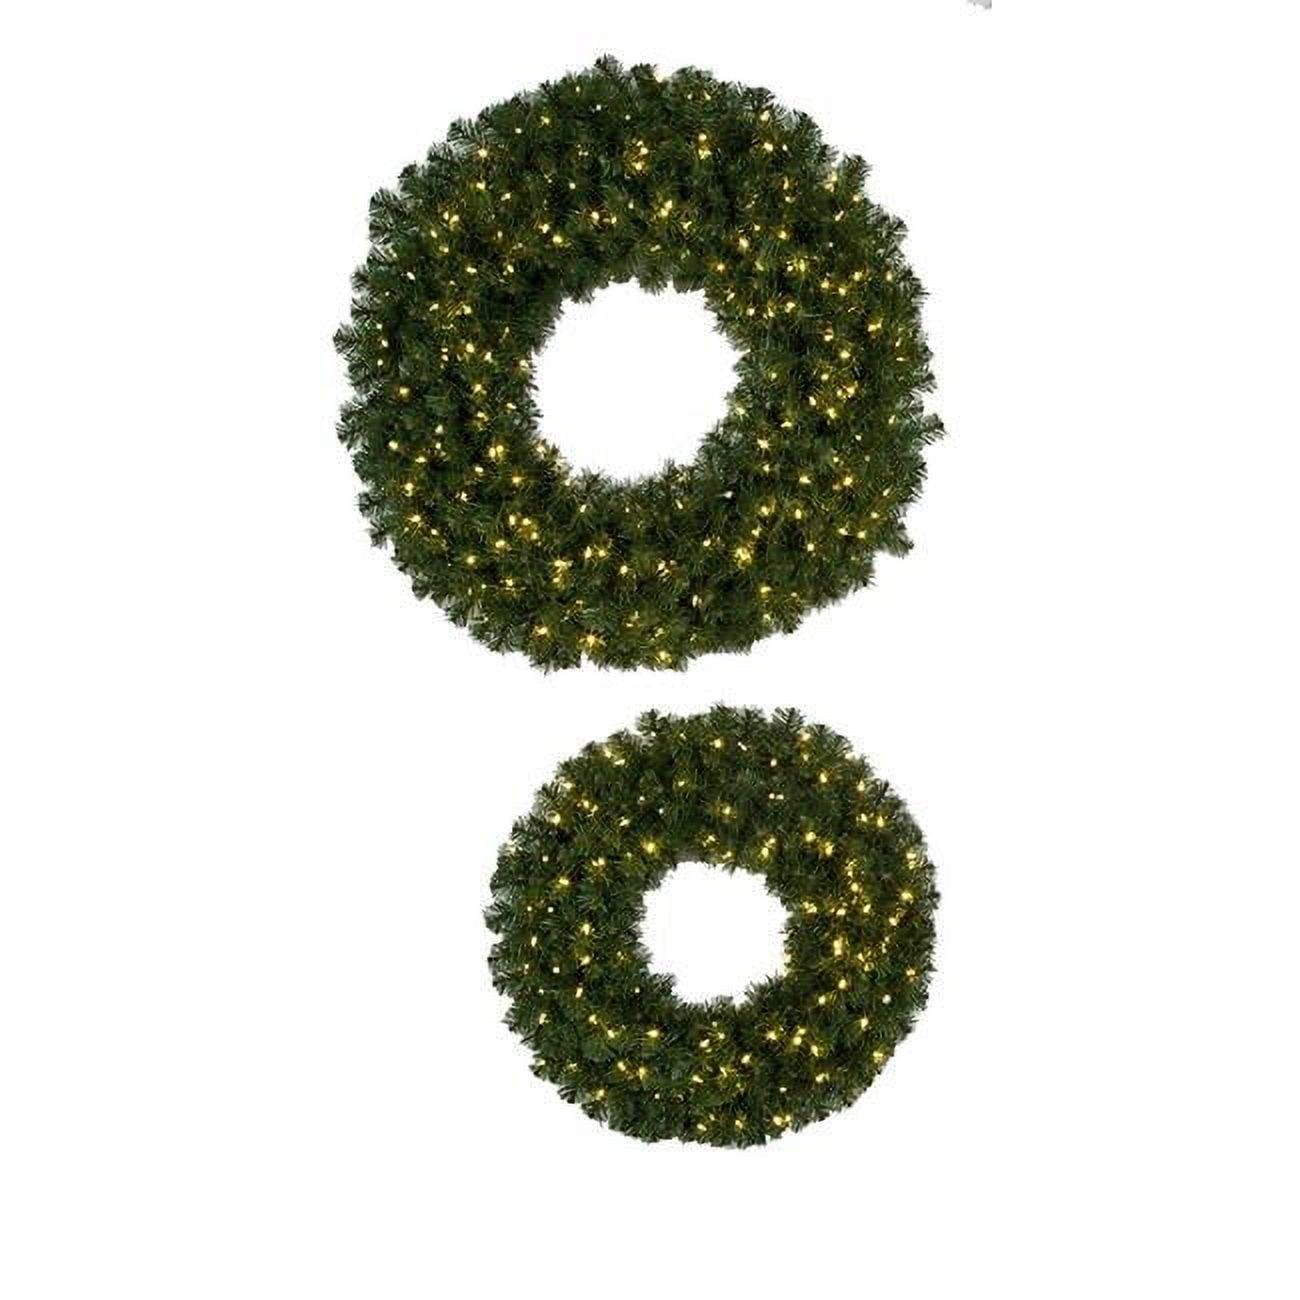 Picture of Autograph Foliages C-190370 60 in. Virginia Pine Wreath, Green